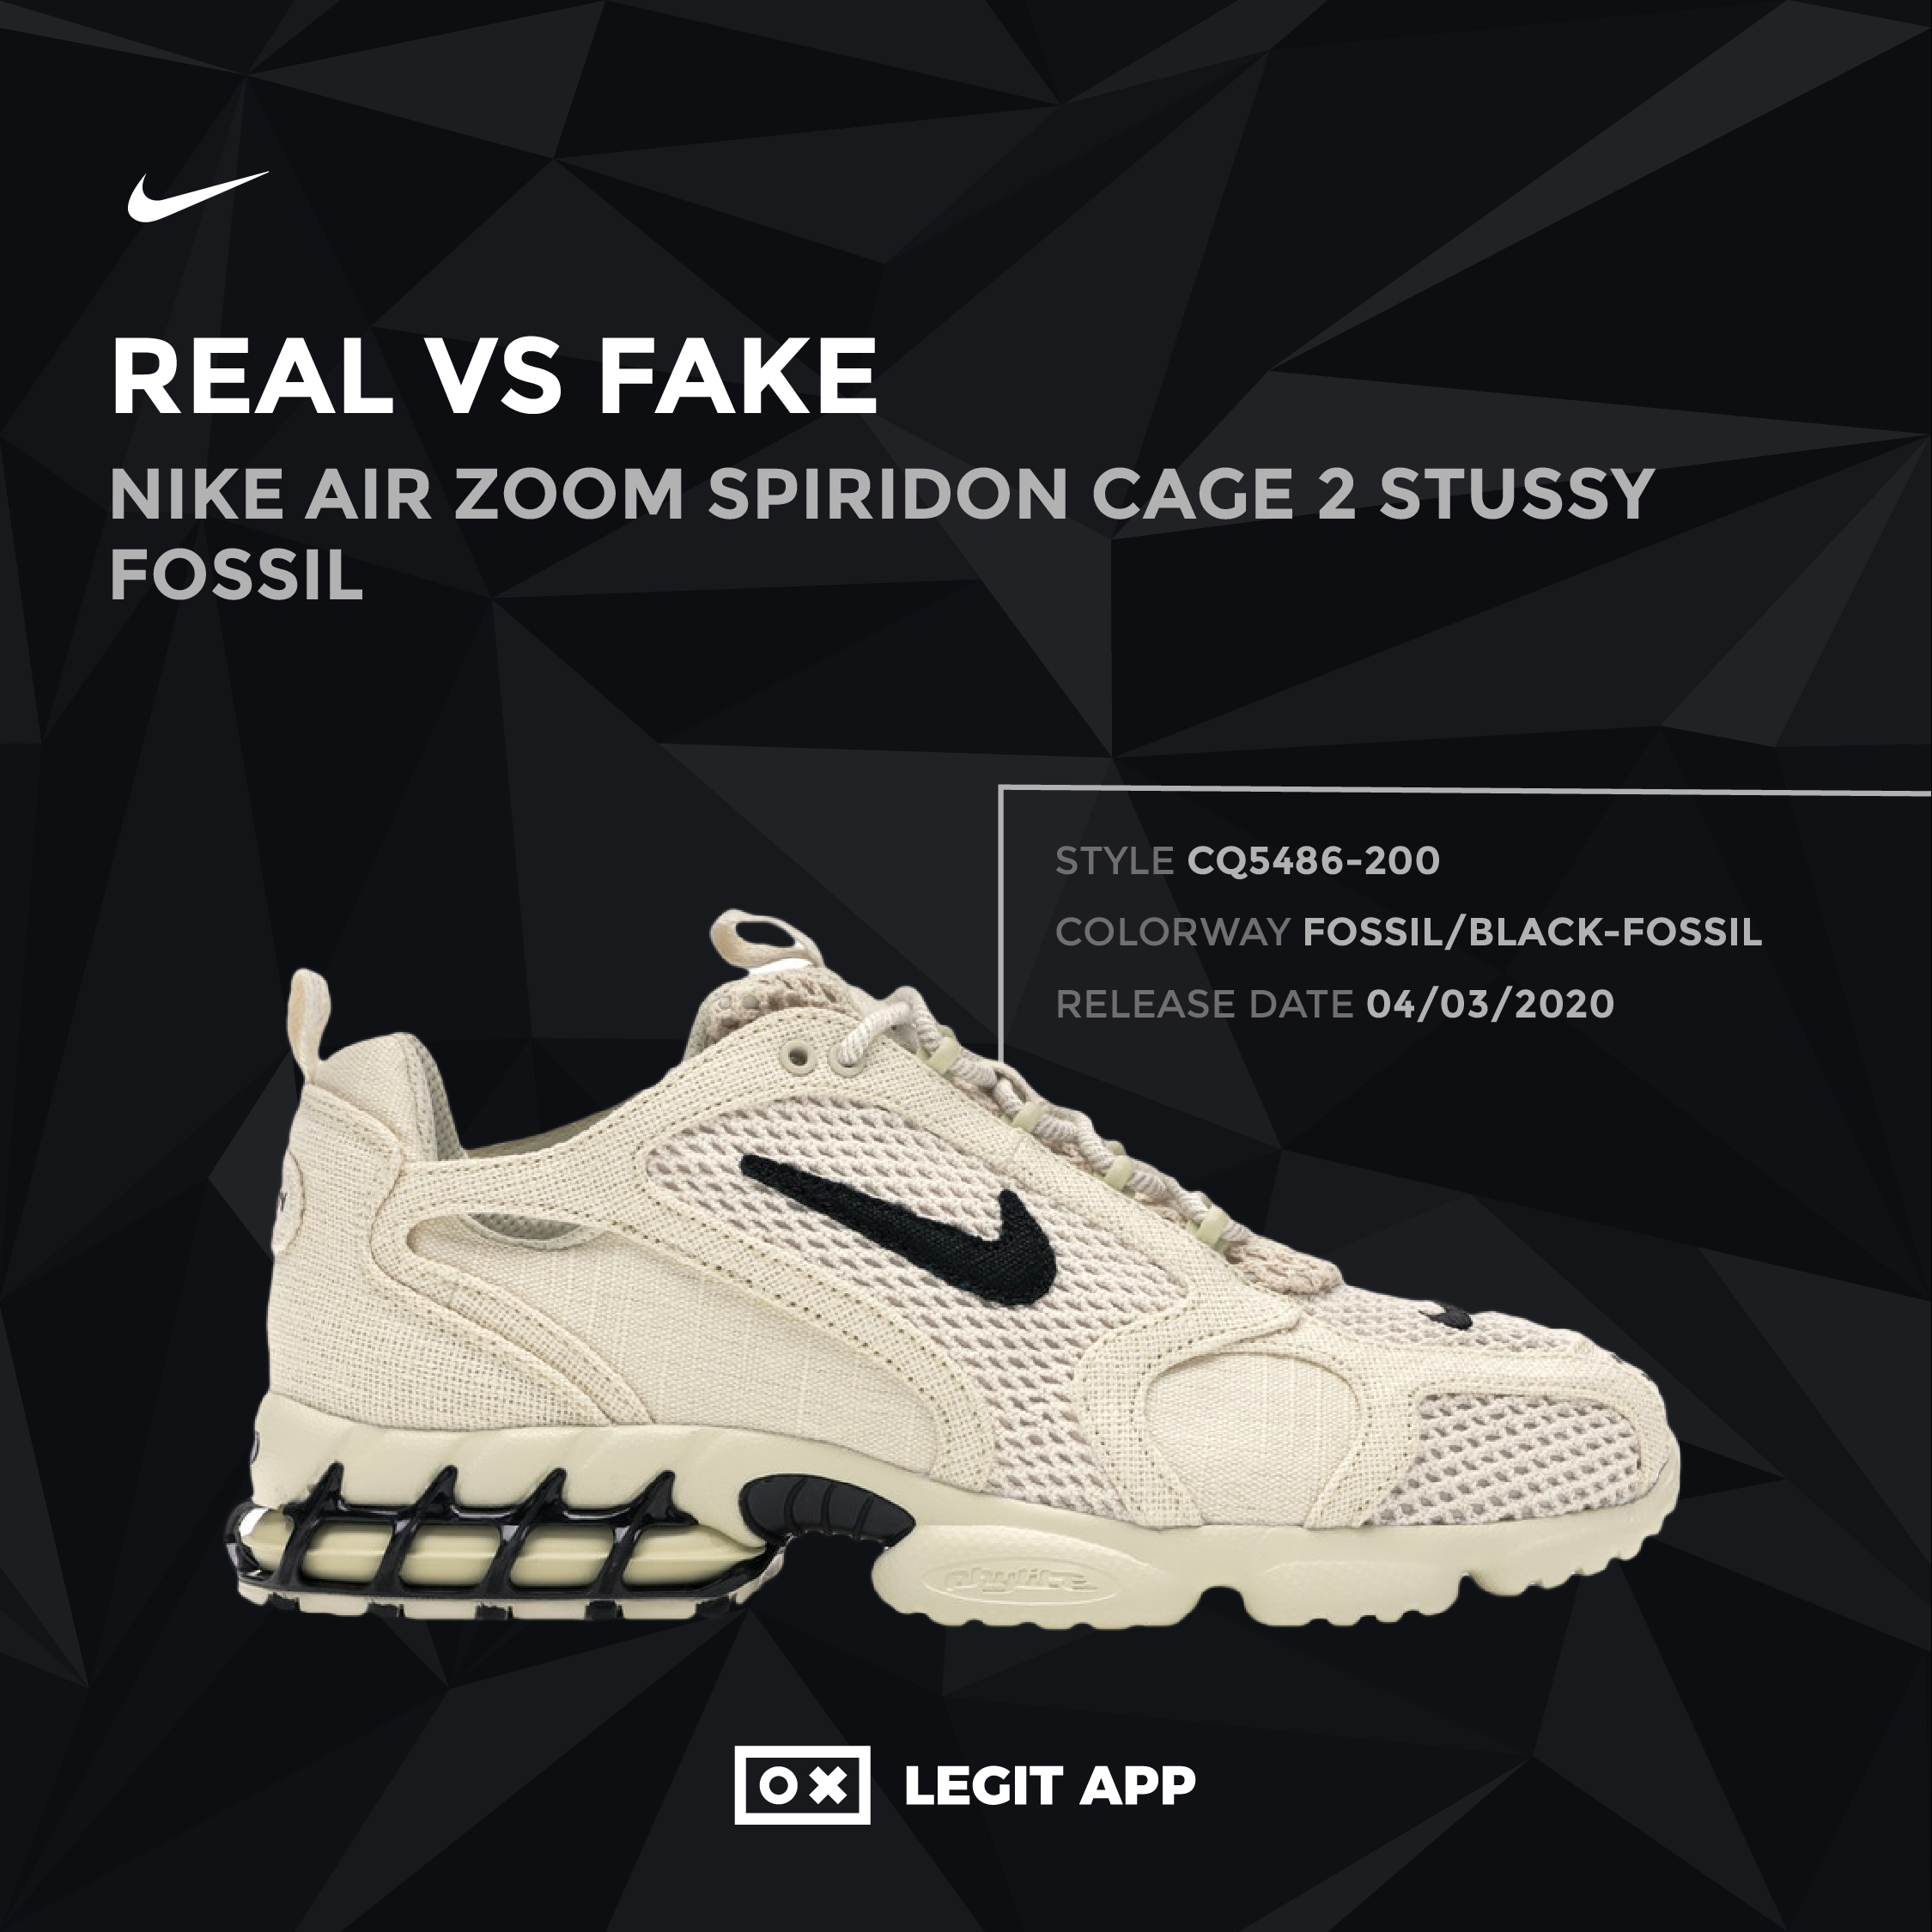 REAL VS REPLICA - Nike Air Zoom Spiridon Cage 2 Stussy Fossil